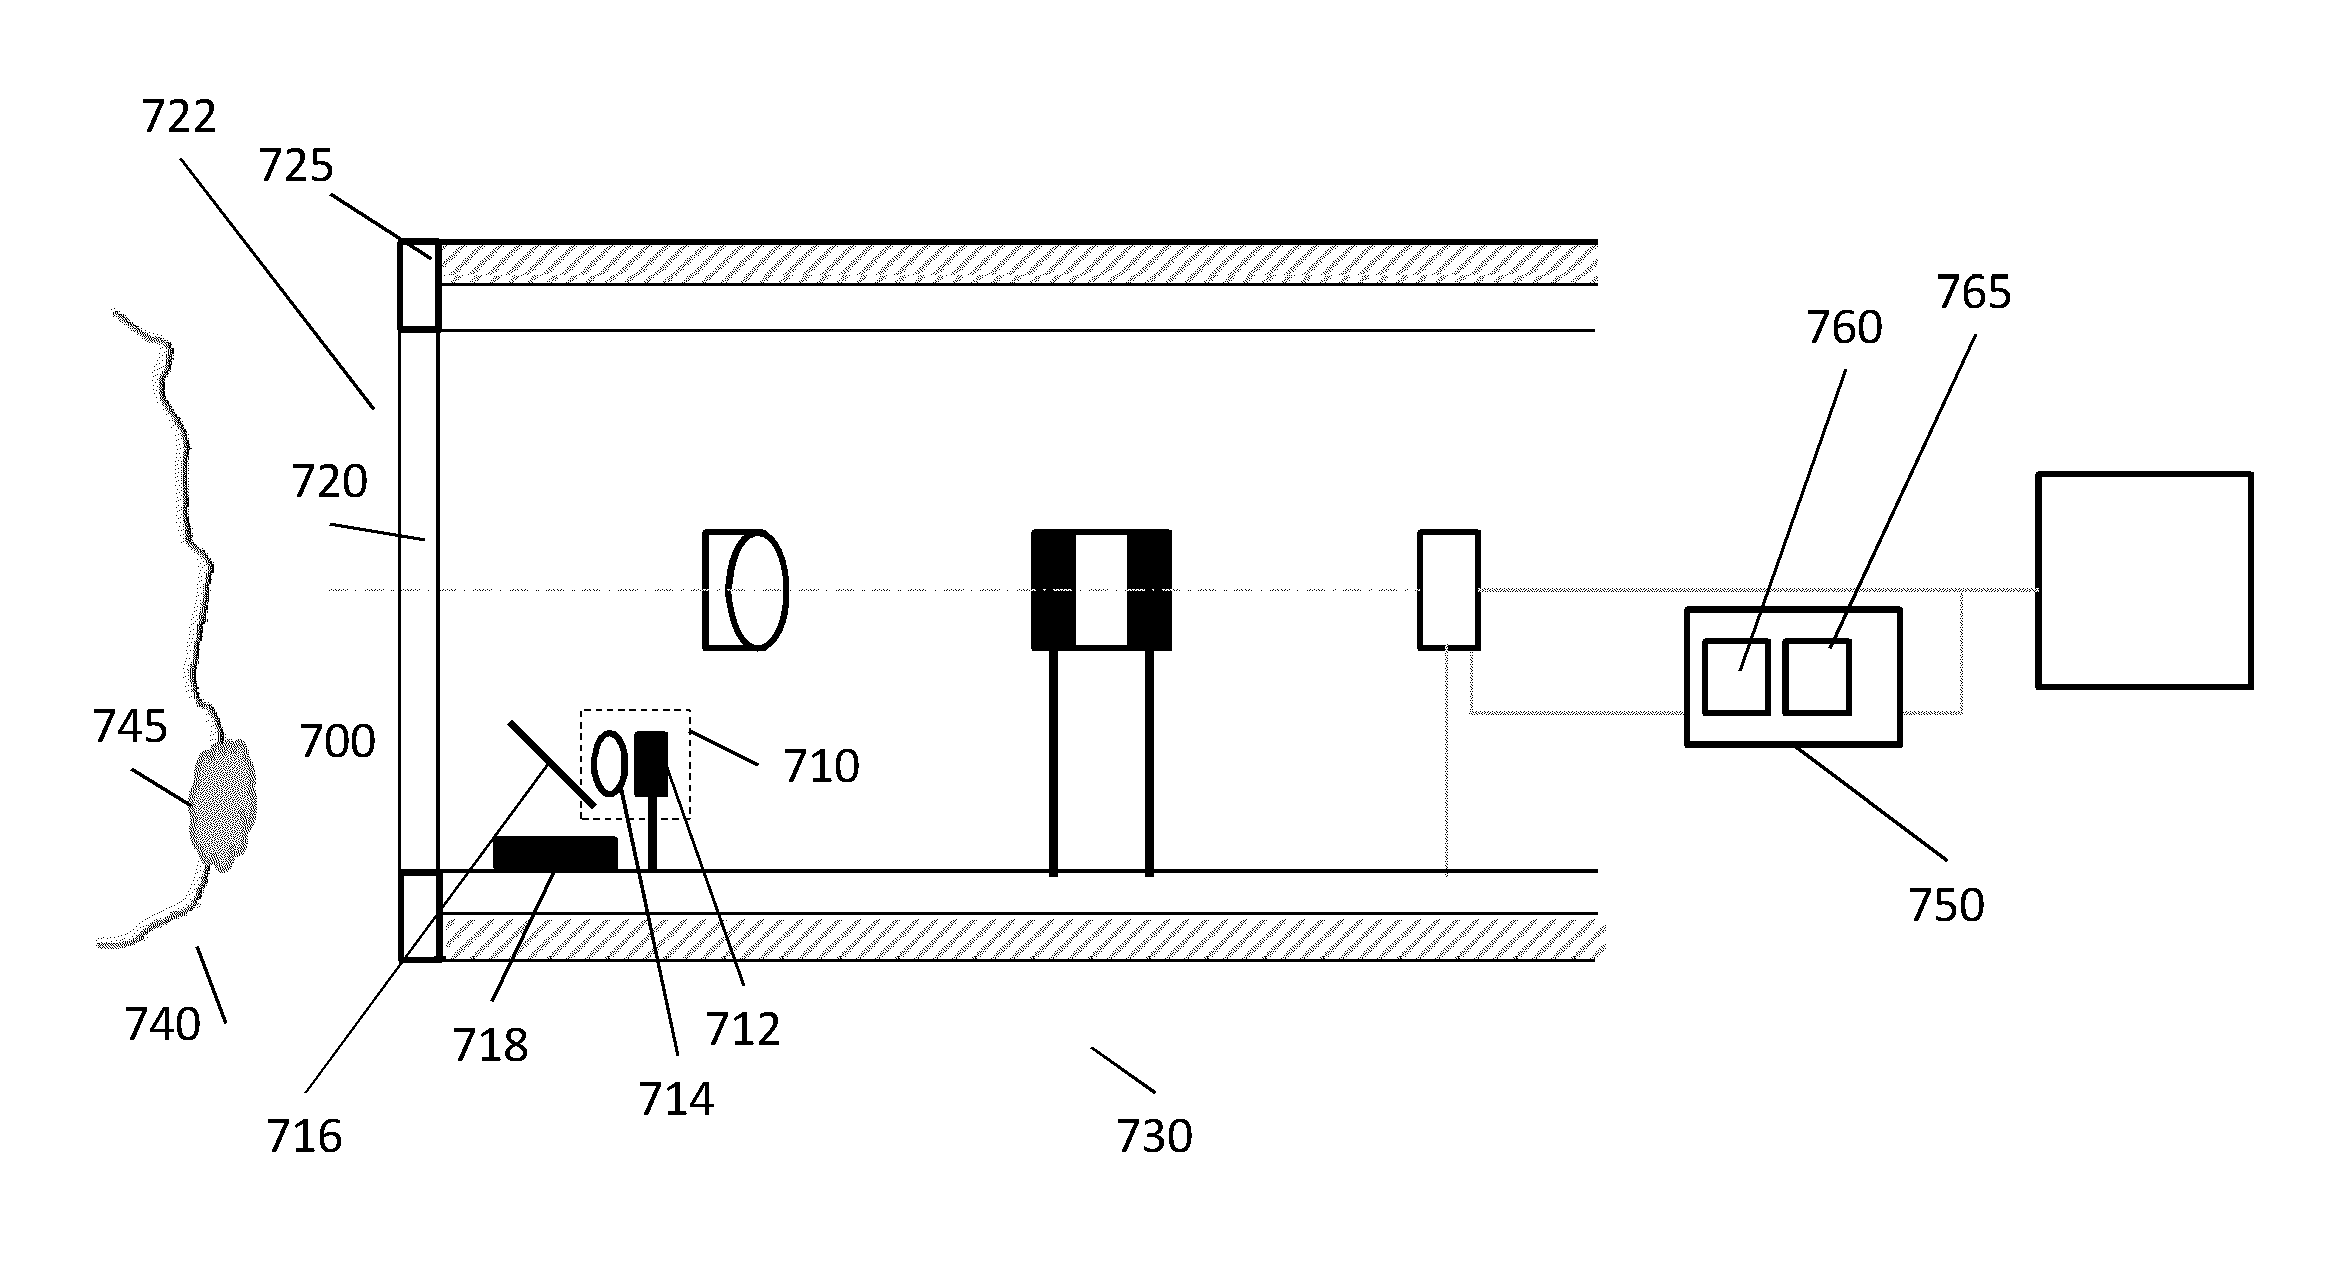 Endoscope with Electrically Adjustable Liquid Crystal Adaptive Lens